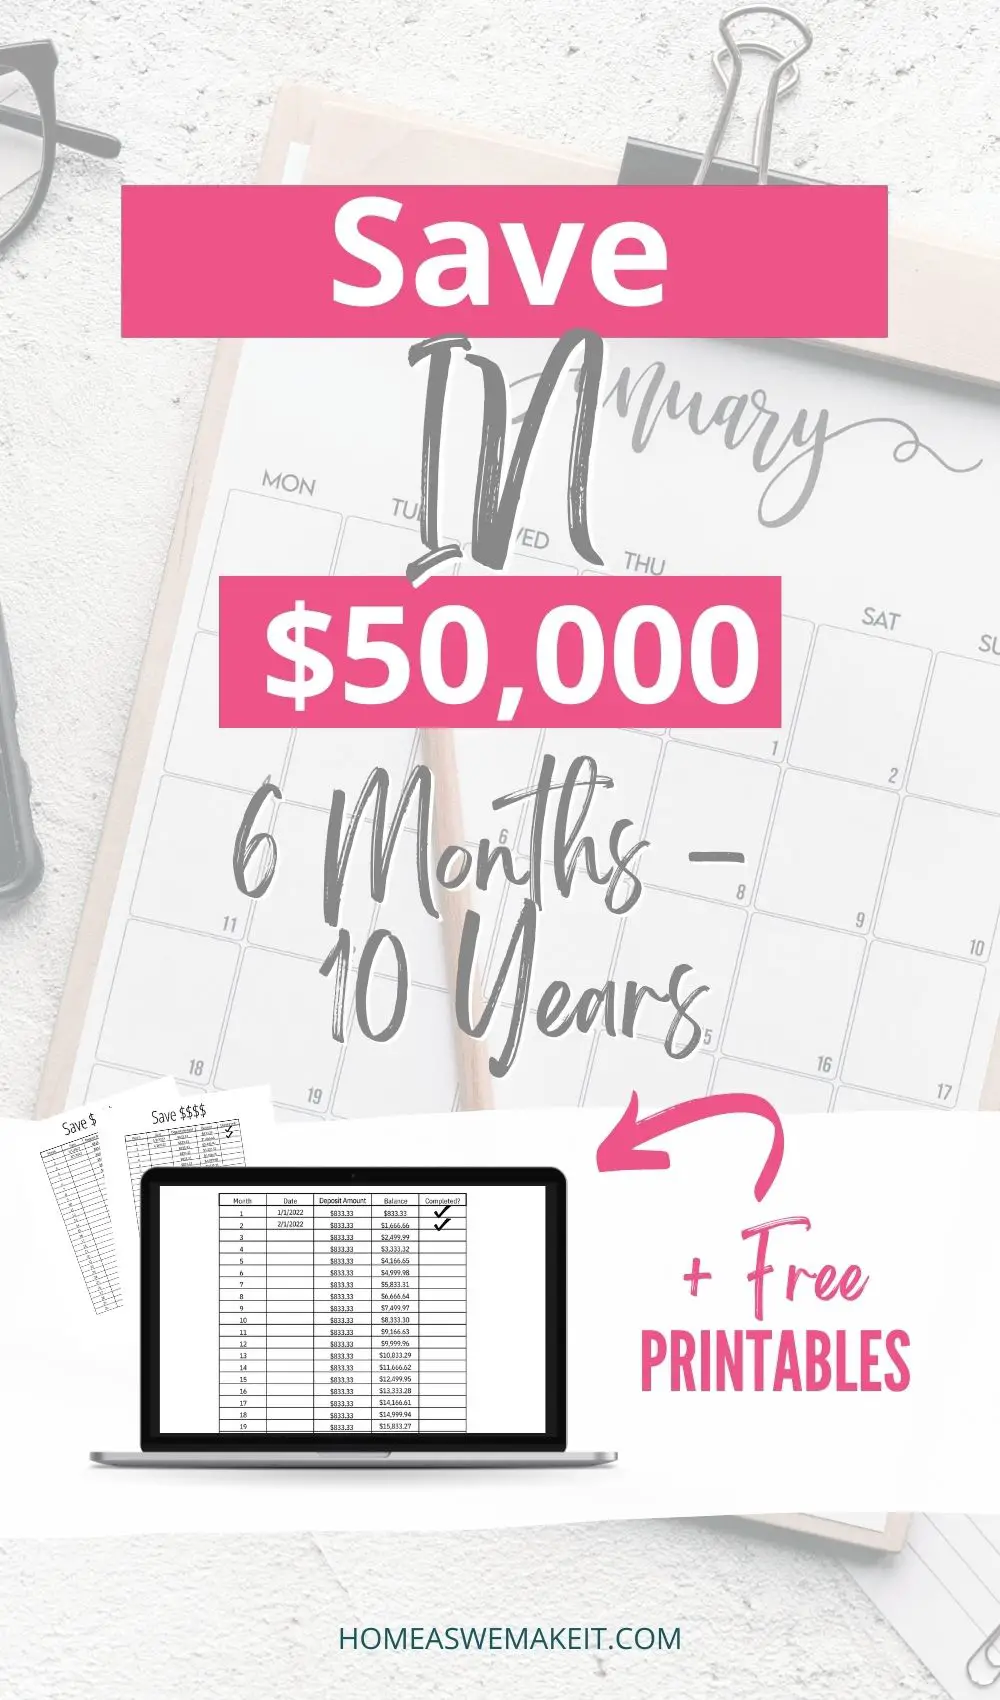 Save $50,000 in 6 months to 1 year with free printable savings trackers